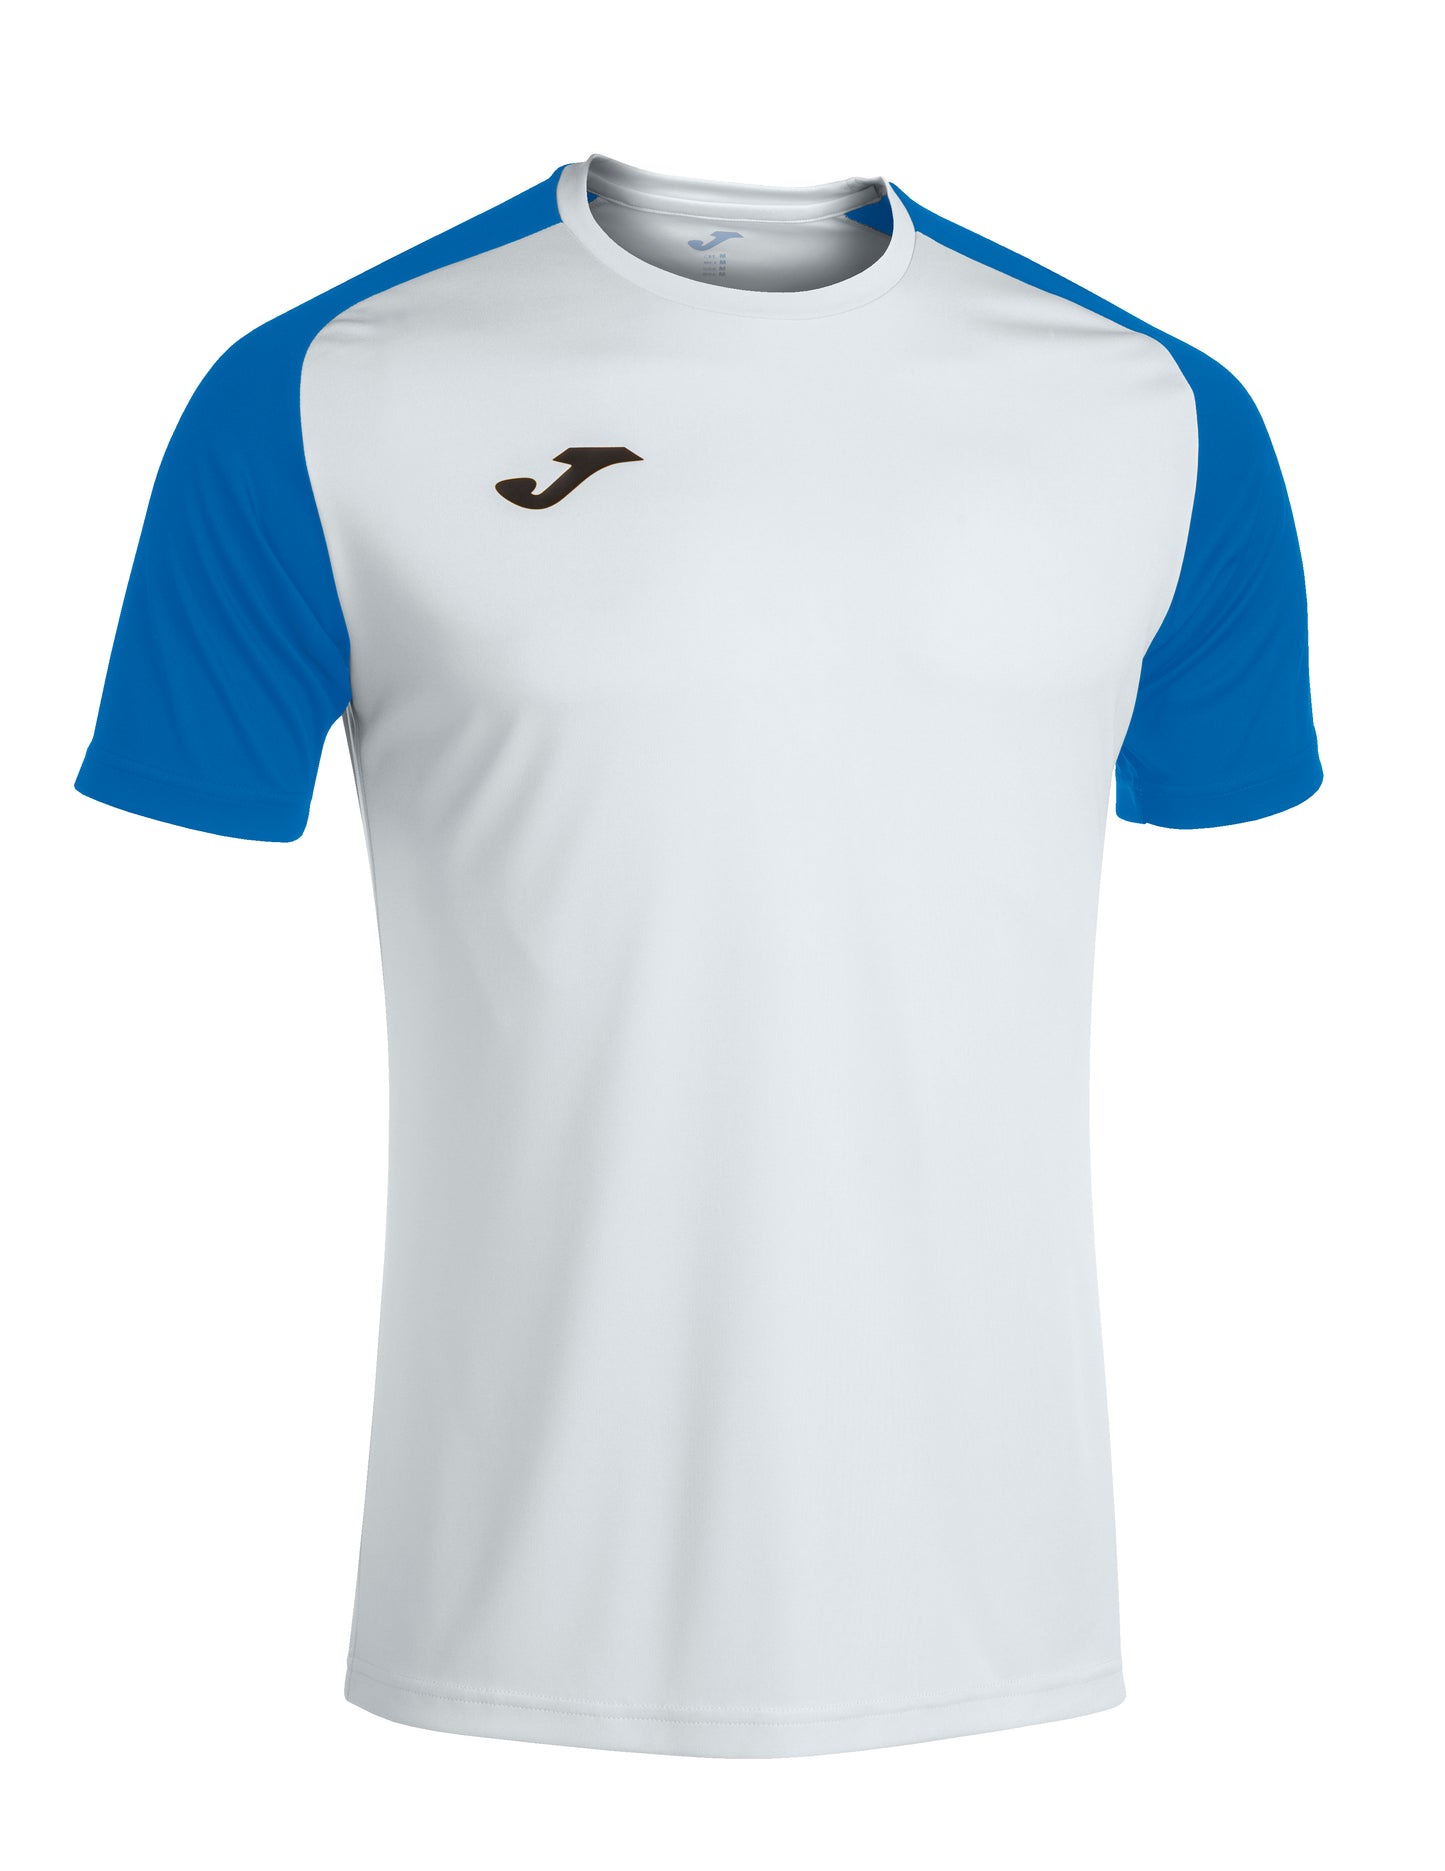 Academy IV - Youth Jersey